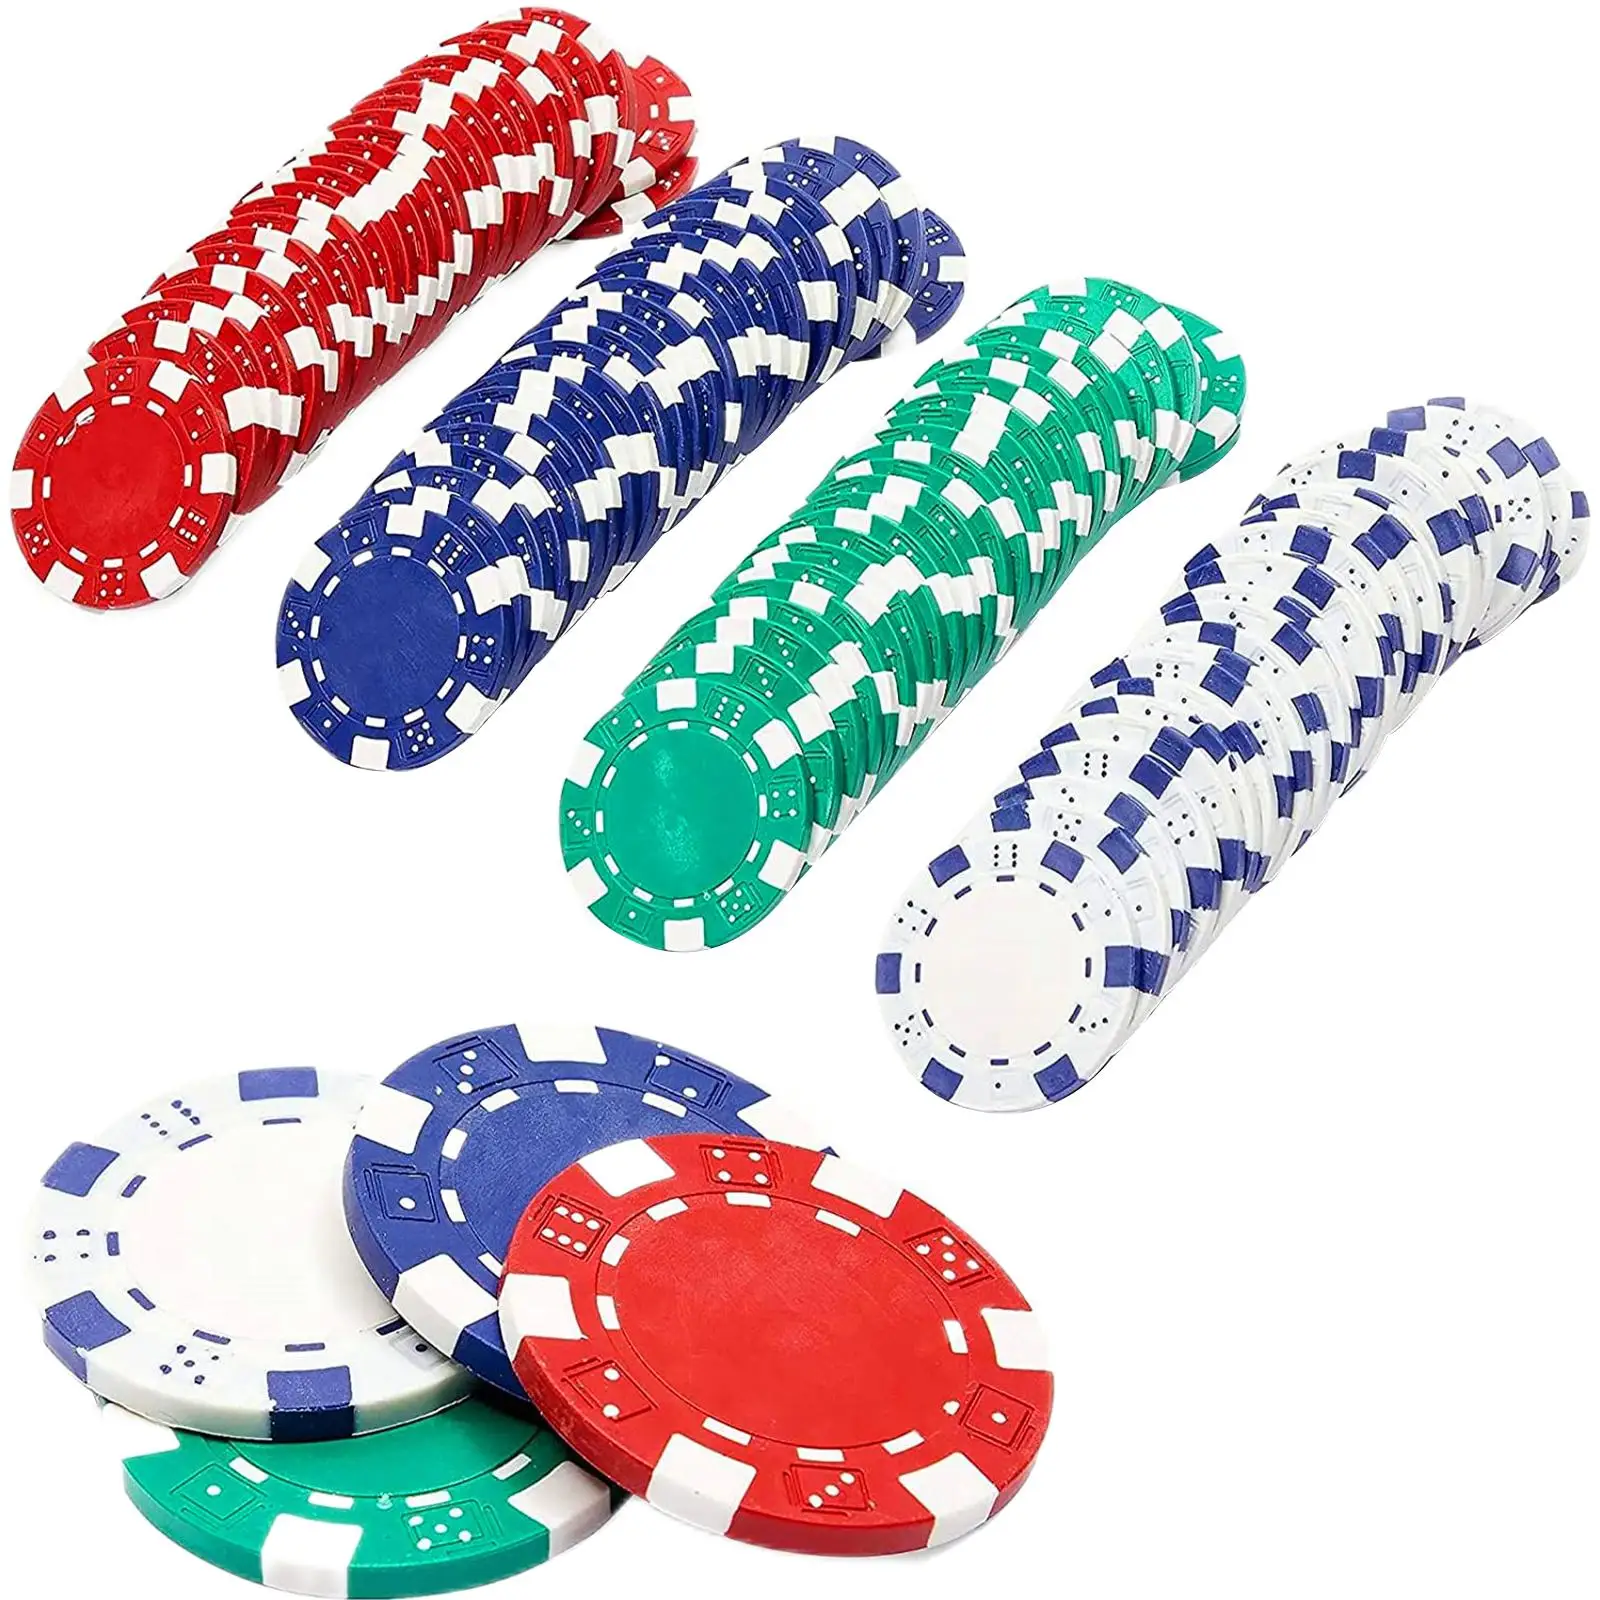 100 Pieces 4cm Poker Chips Multicolor Bingo Chips Markers Counting Discs for Party Activities Poker Bingo Accessories Part